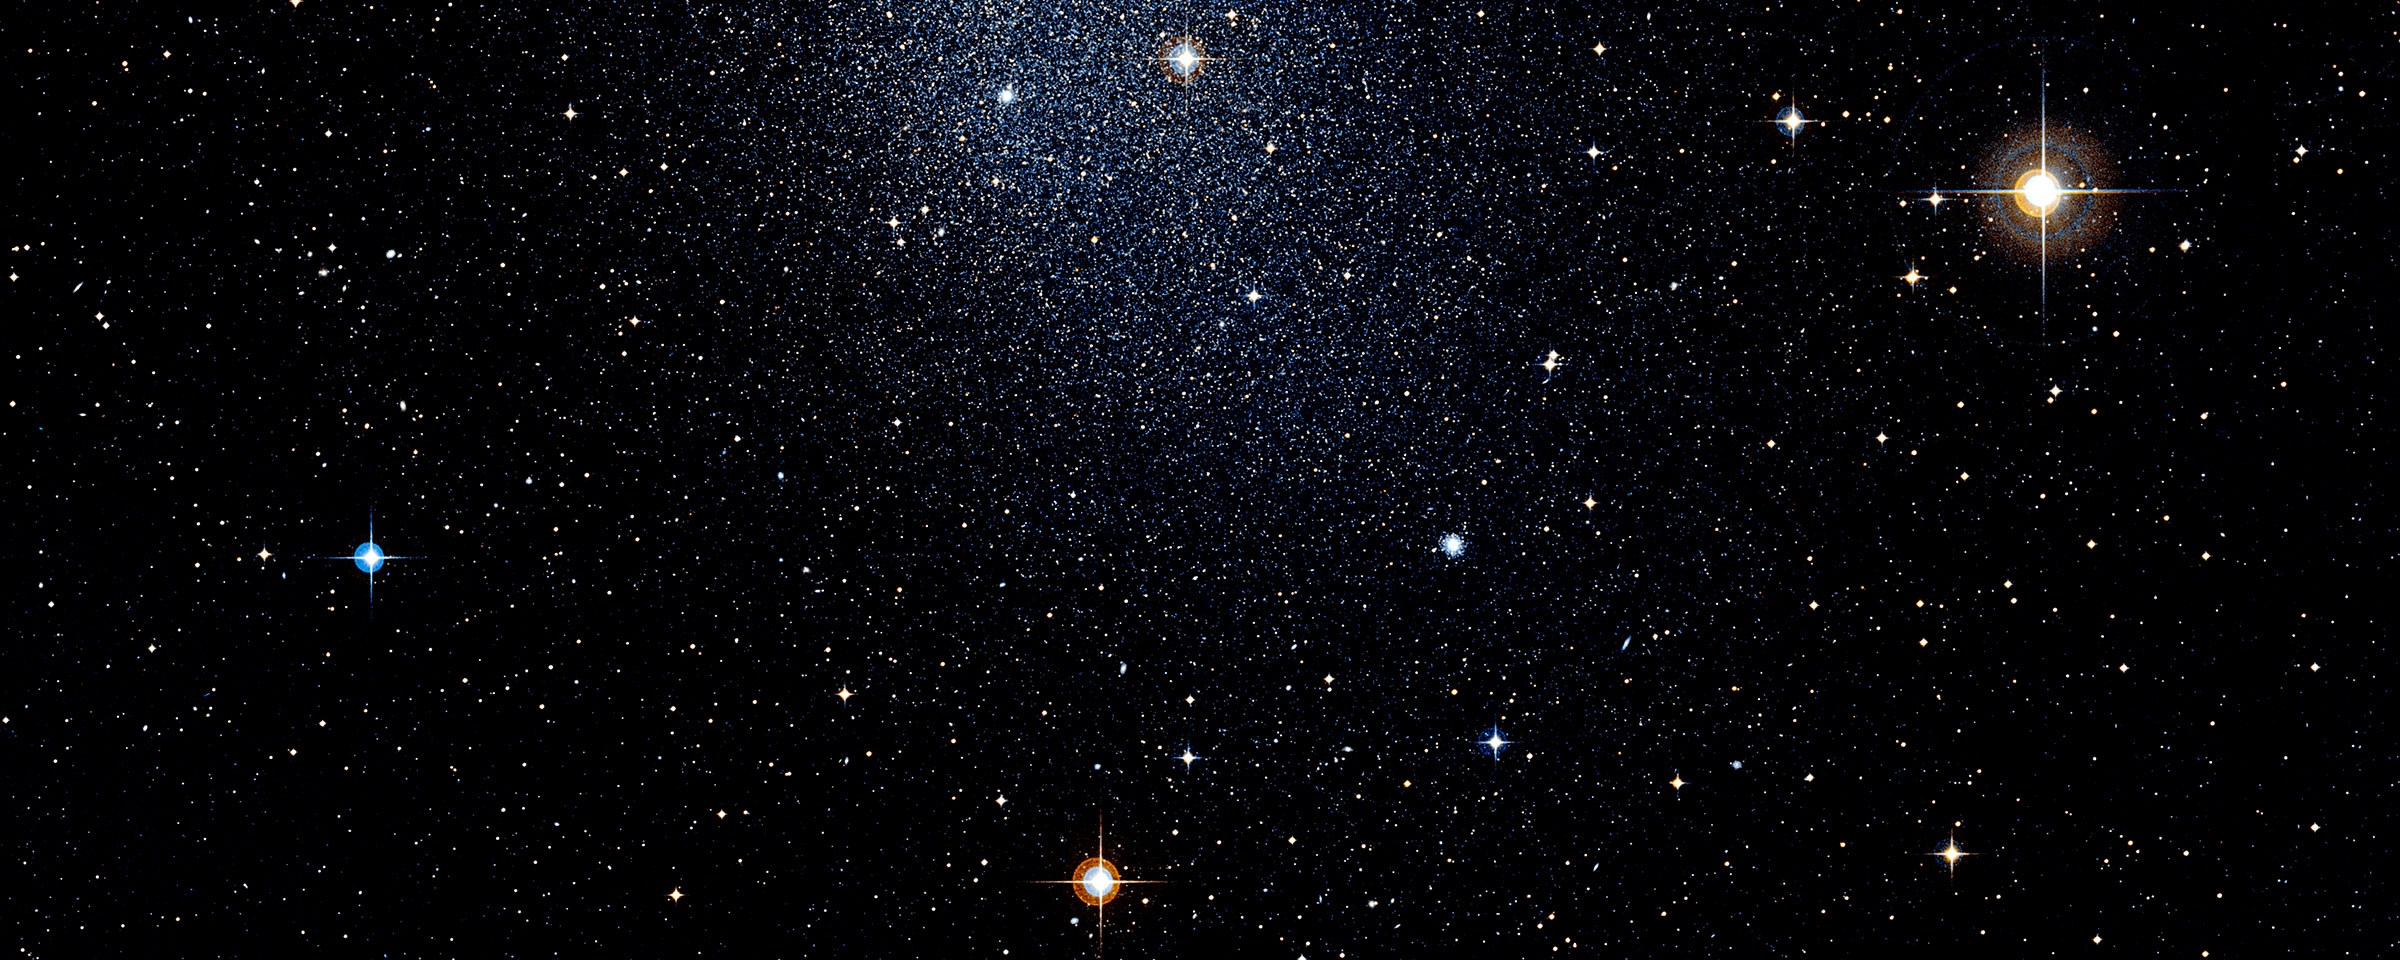 An image from the Sloan Digital Sky Survey  showing stars and dwarf planets in the universe